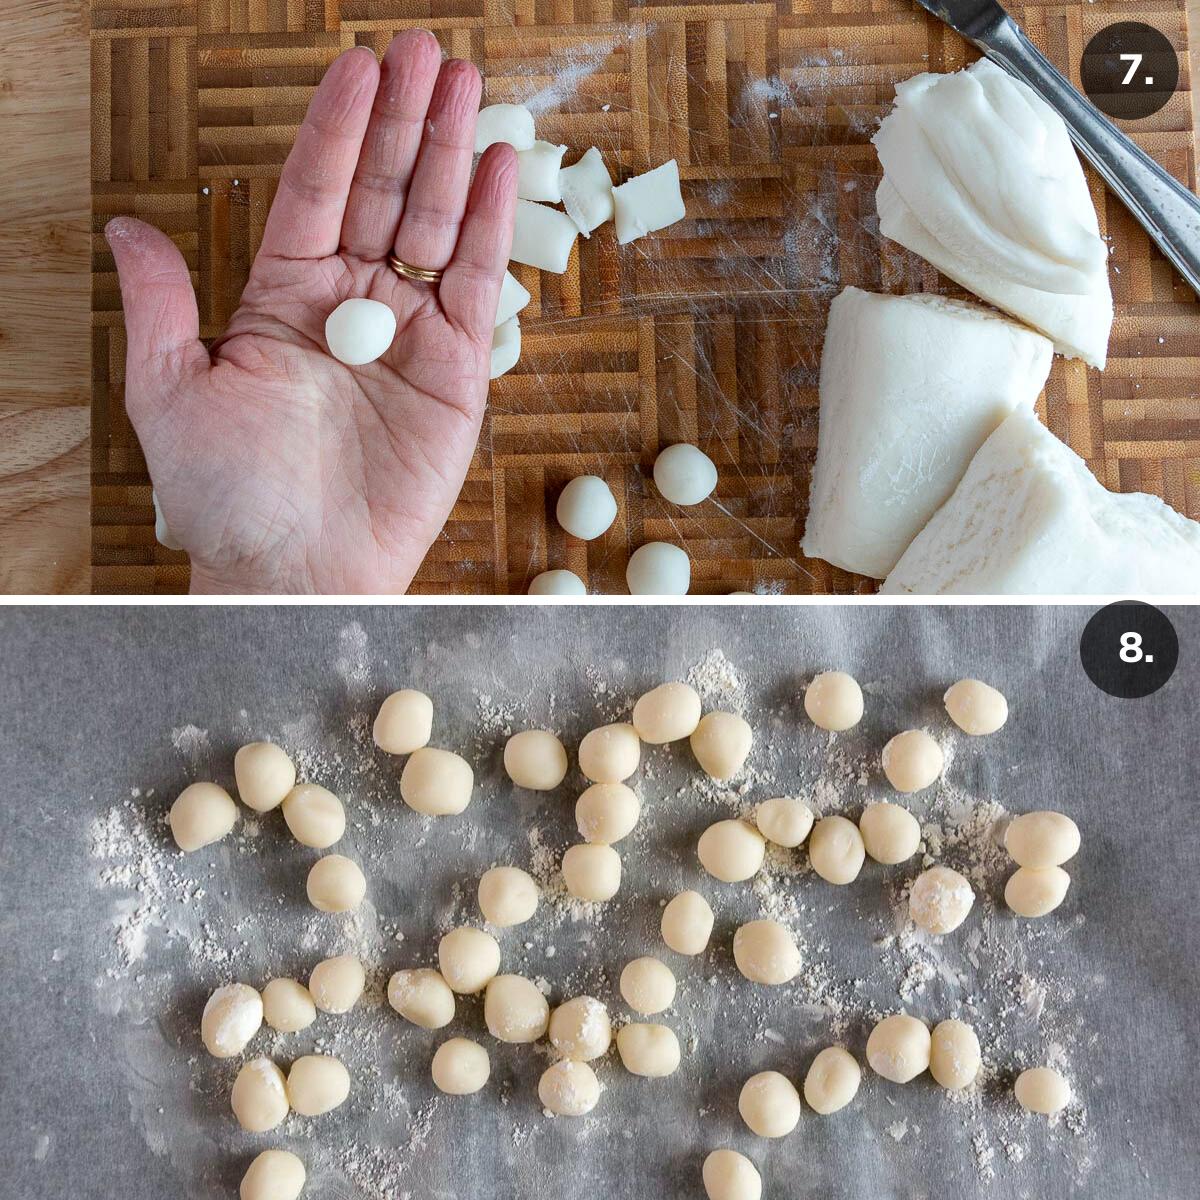 Rolling the glutinous rice balls in our hands and then placing them on a lined baking sheet.